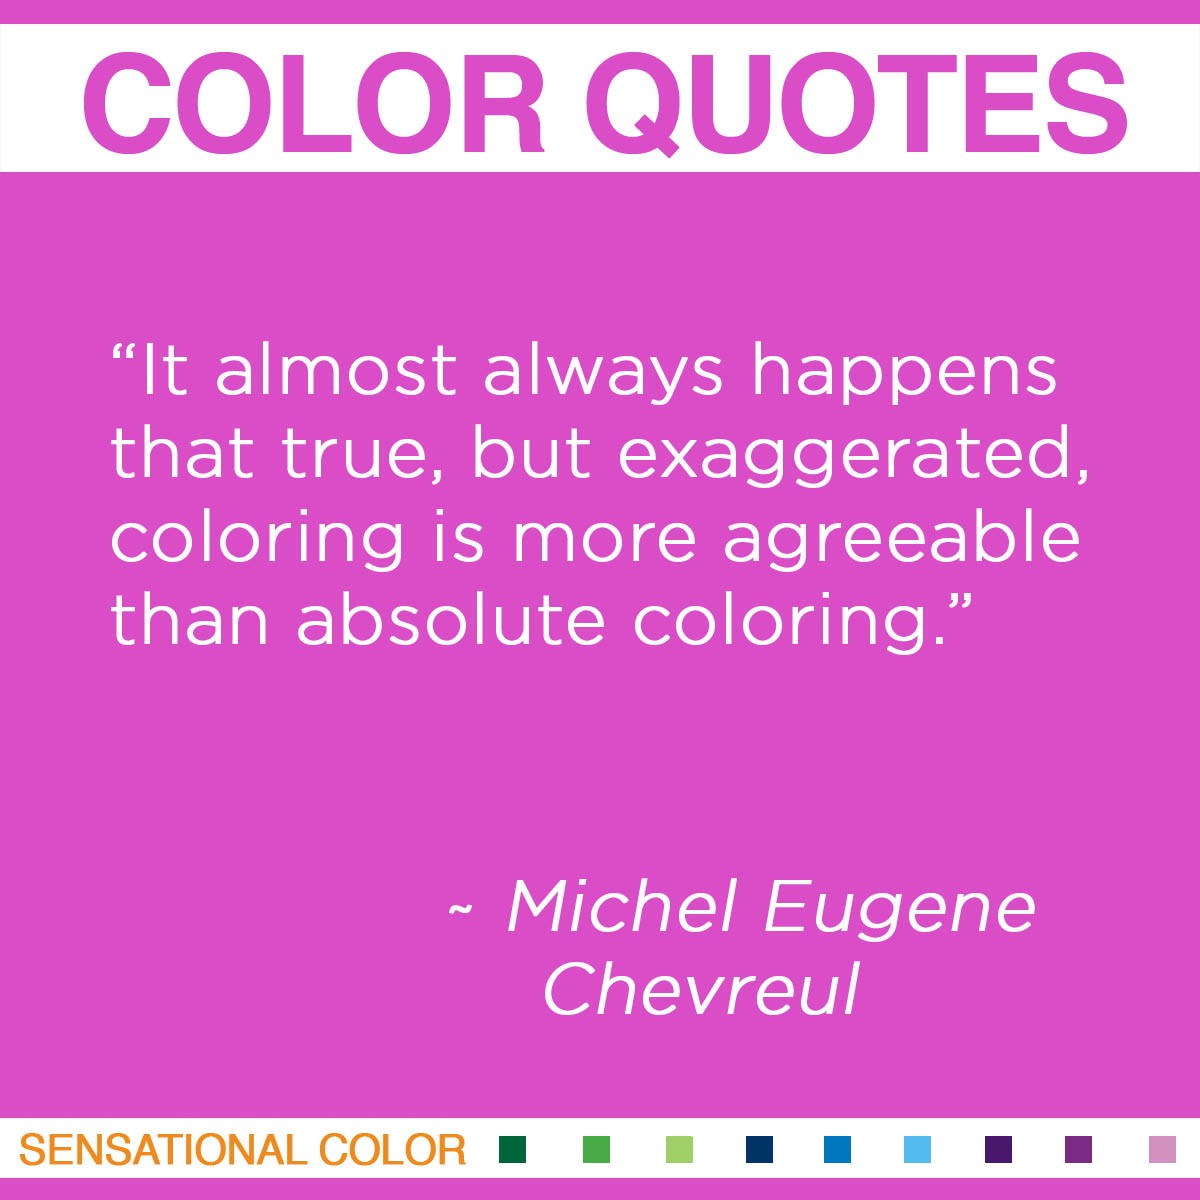 “It almost always happens that true, but exaggerated, coloring is more agreeable than absolute coloring.” - Michel Eugene Chevreul 